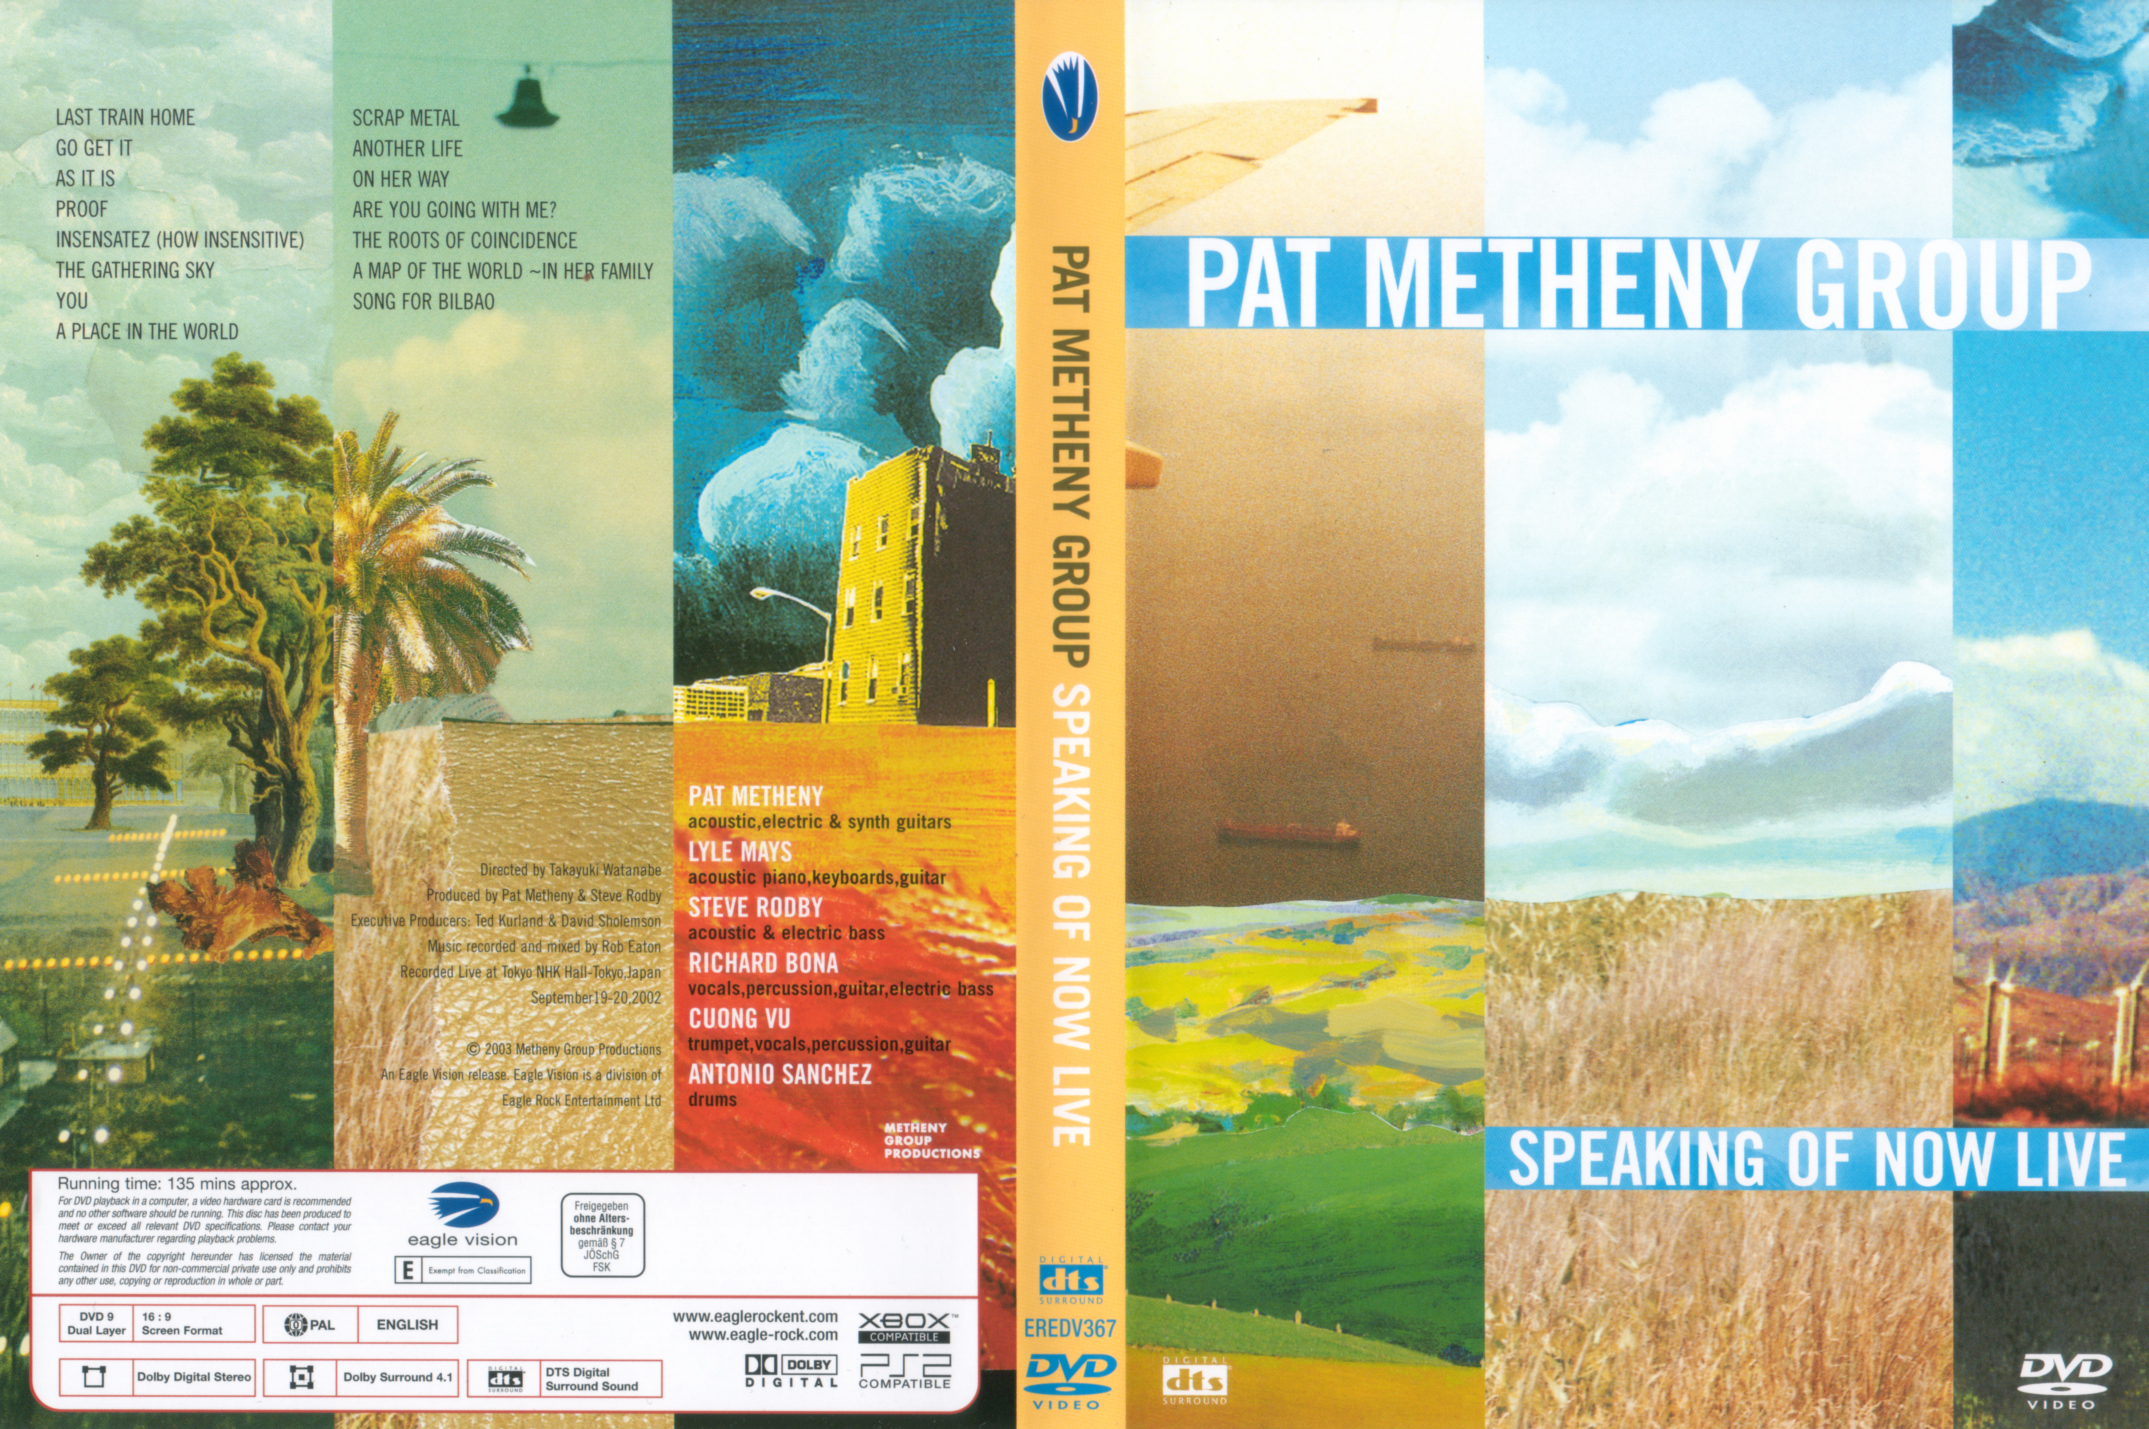 Jaquette DVD Pat Metheny Group - Speaking of now live